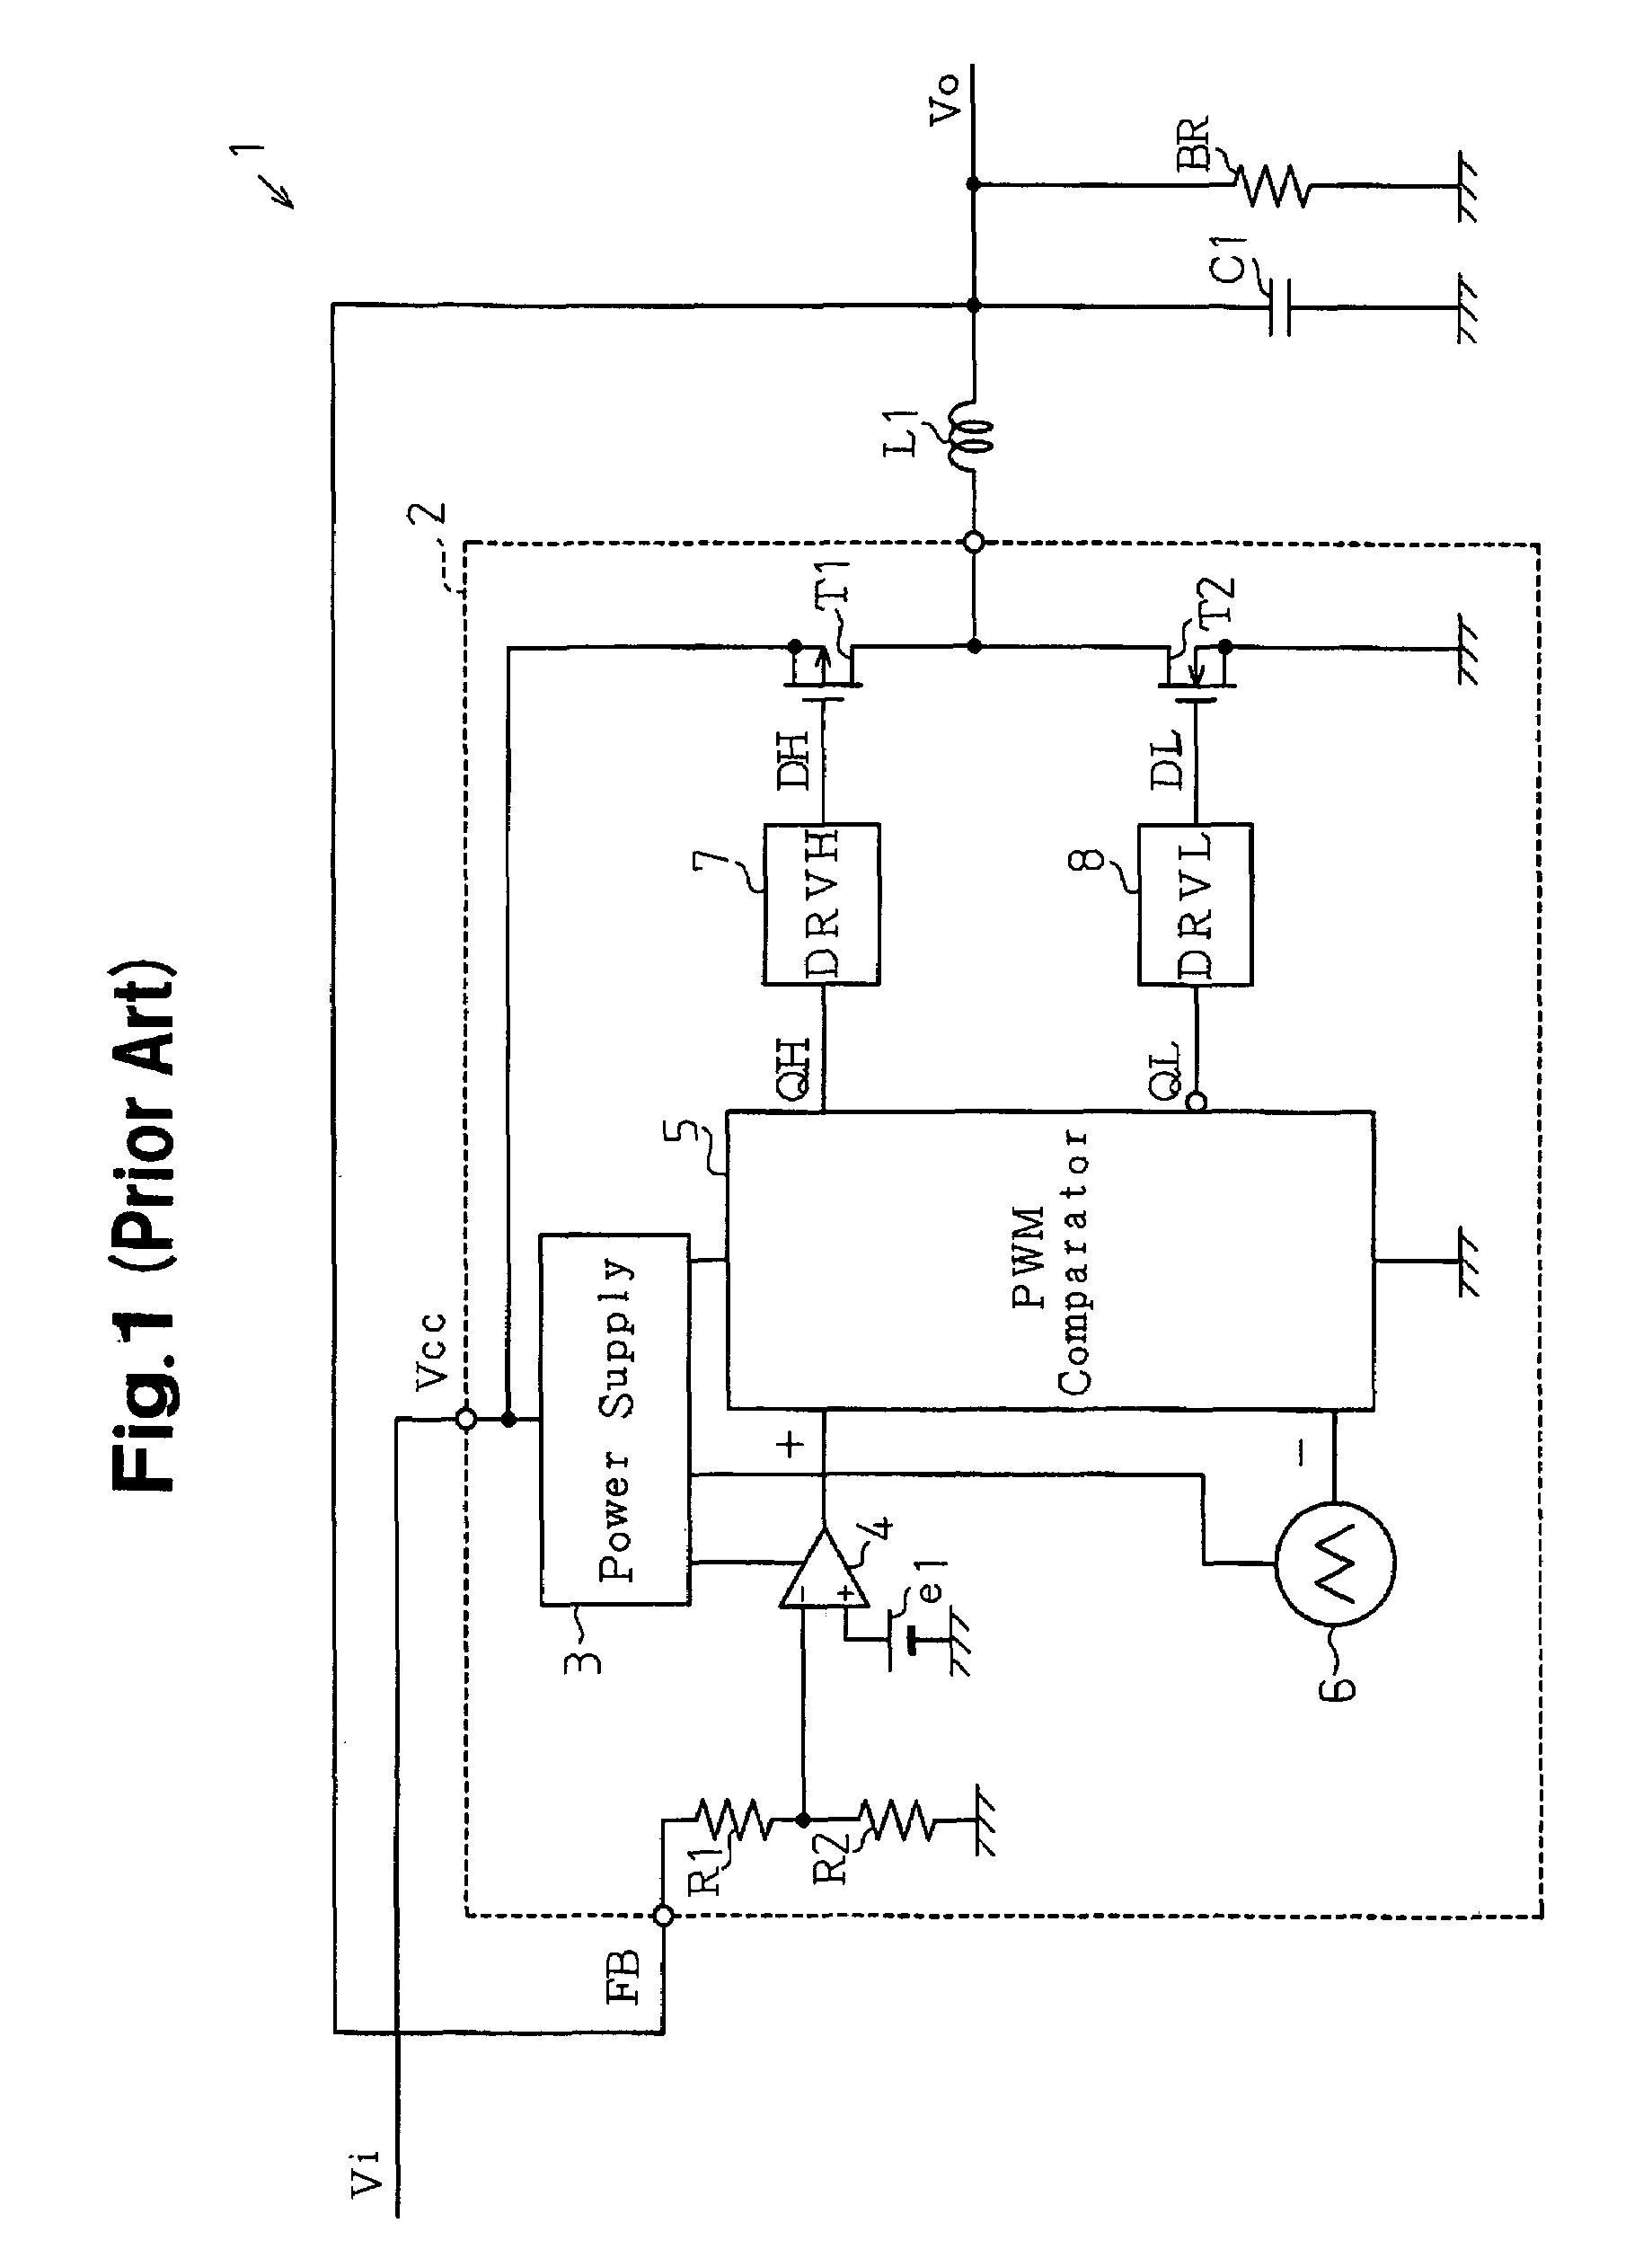 Circuit and method for controlling a DC-DC converter by enabling the synchronous rectifier during undervoltage lockout